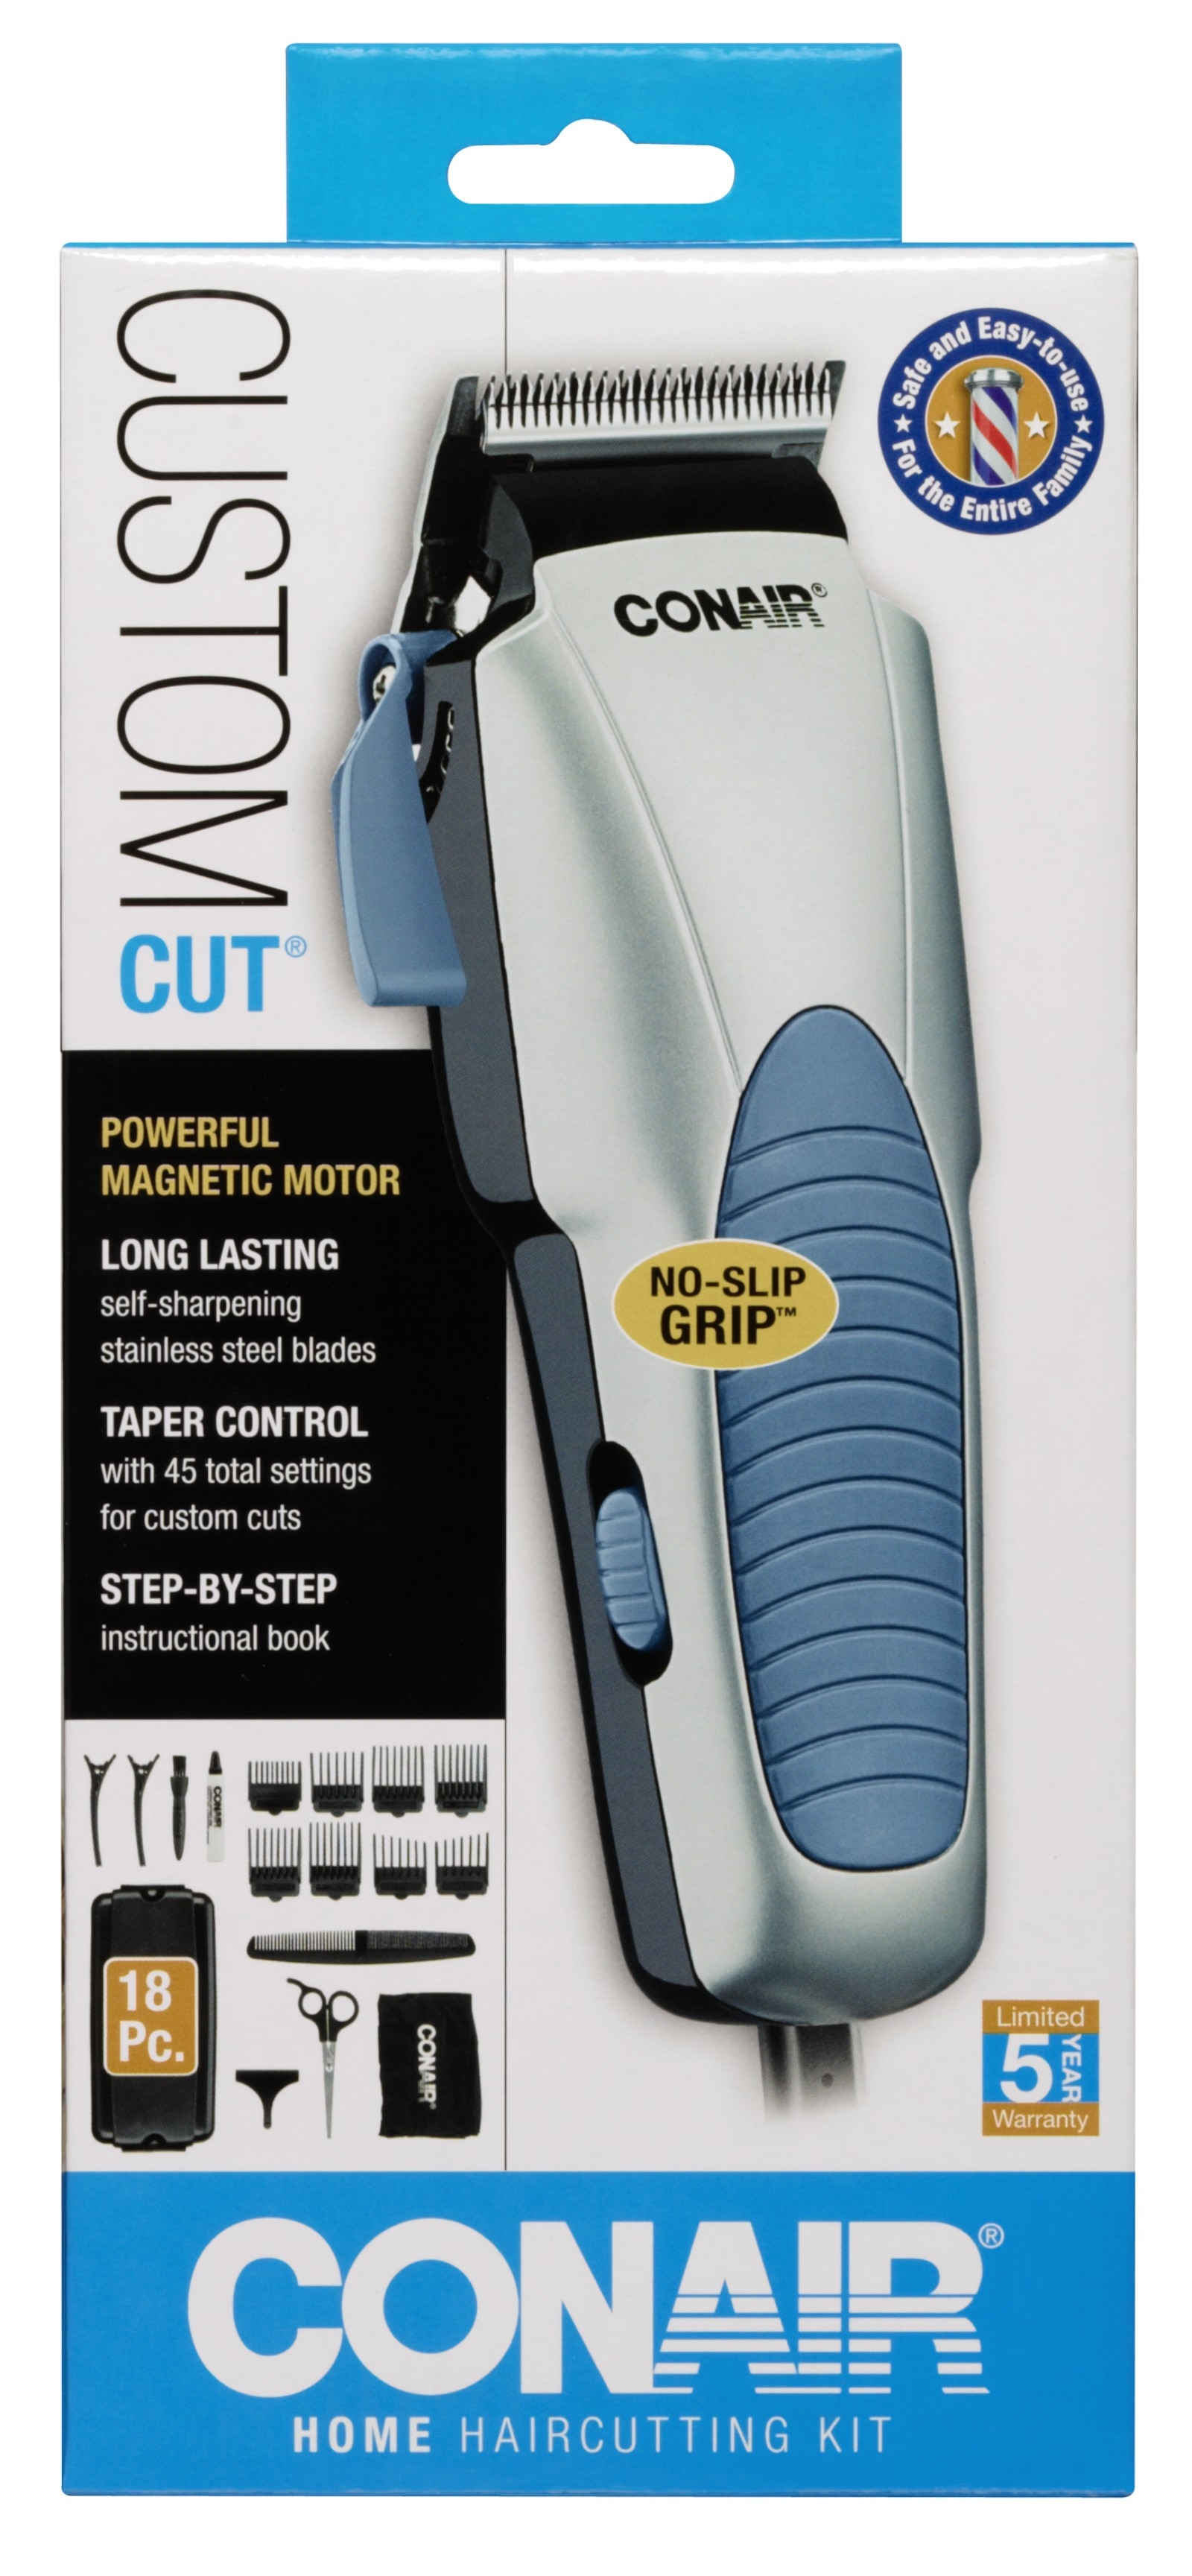 personalized hair clippers